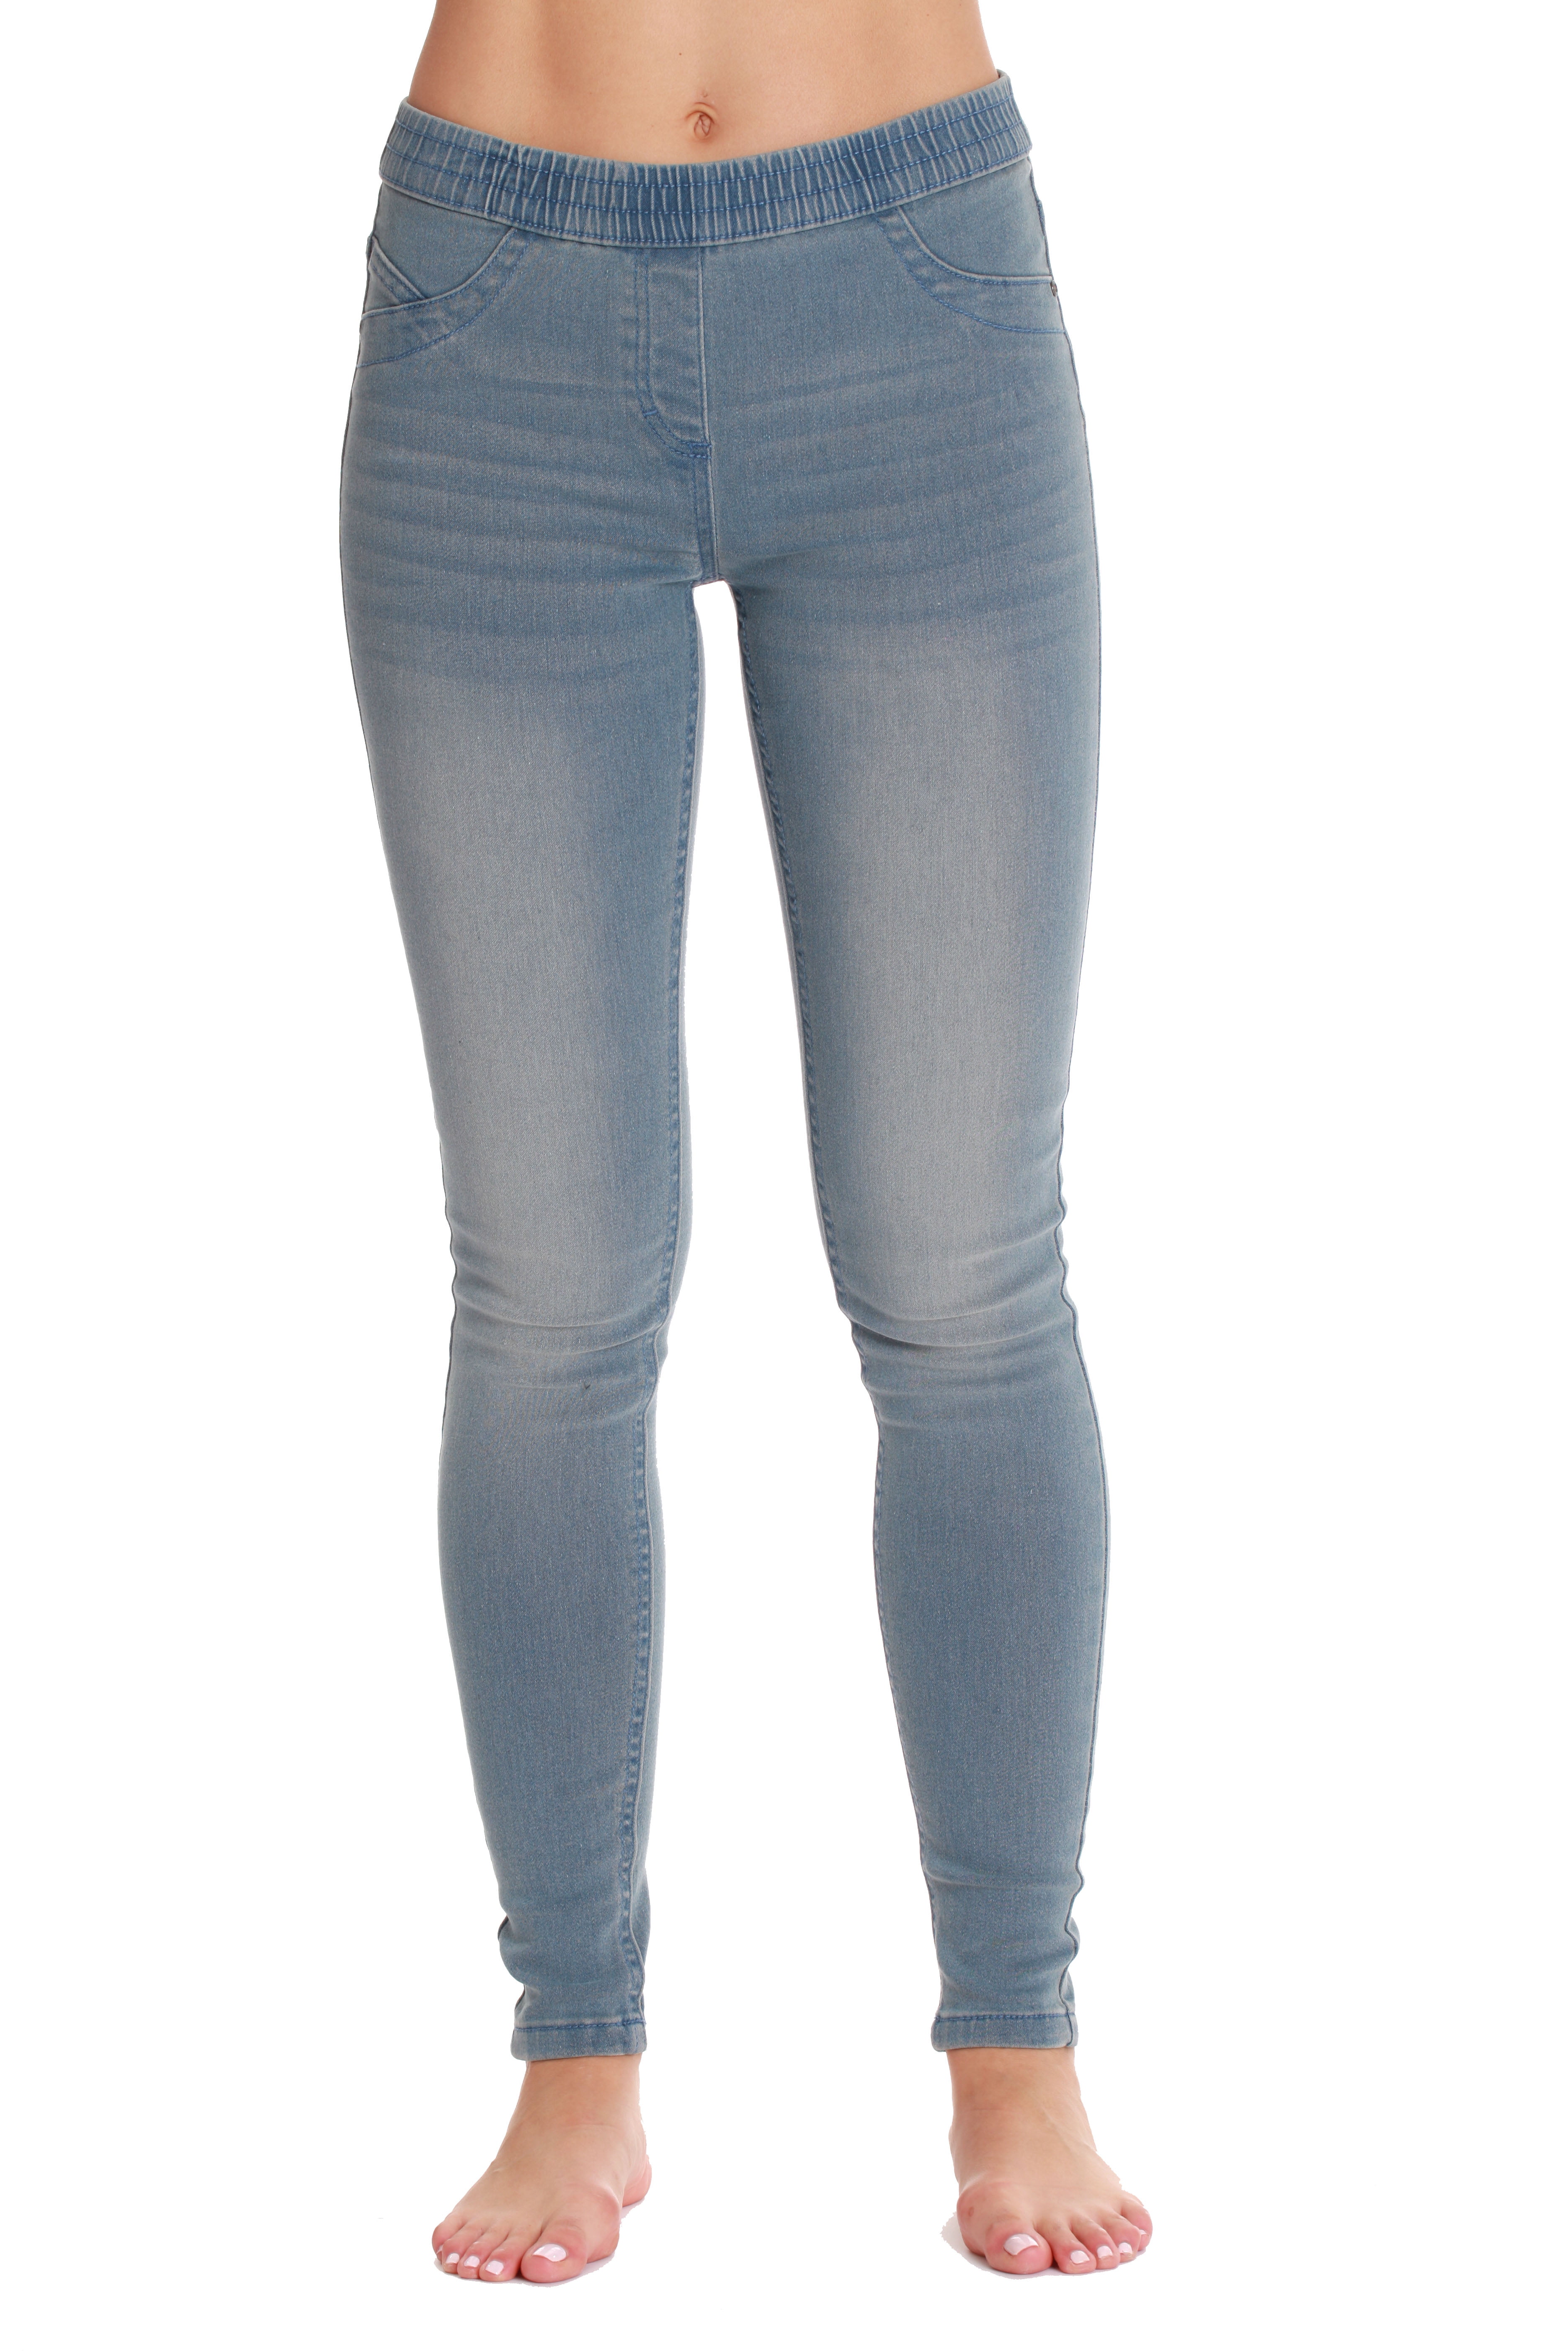 Just Love Women's Denim Jeggings with Pockets - Comfortable